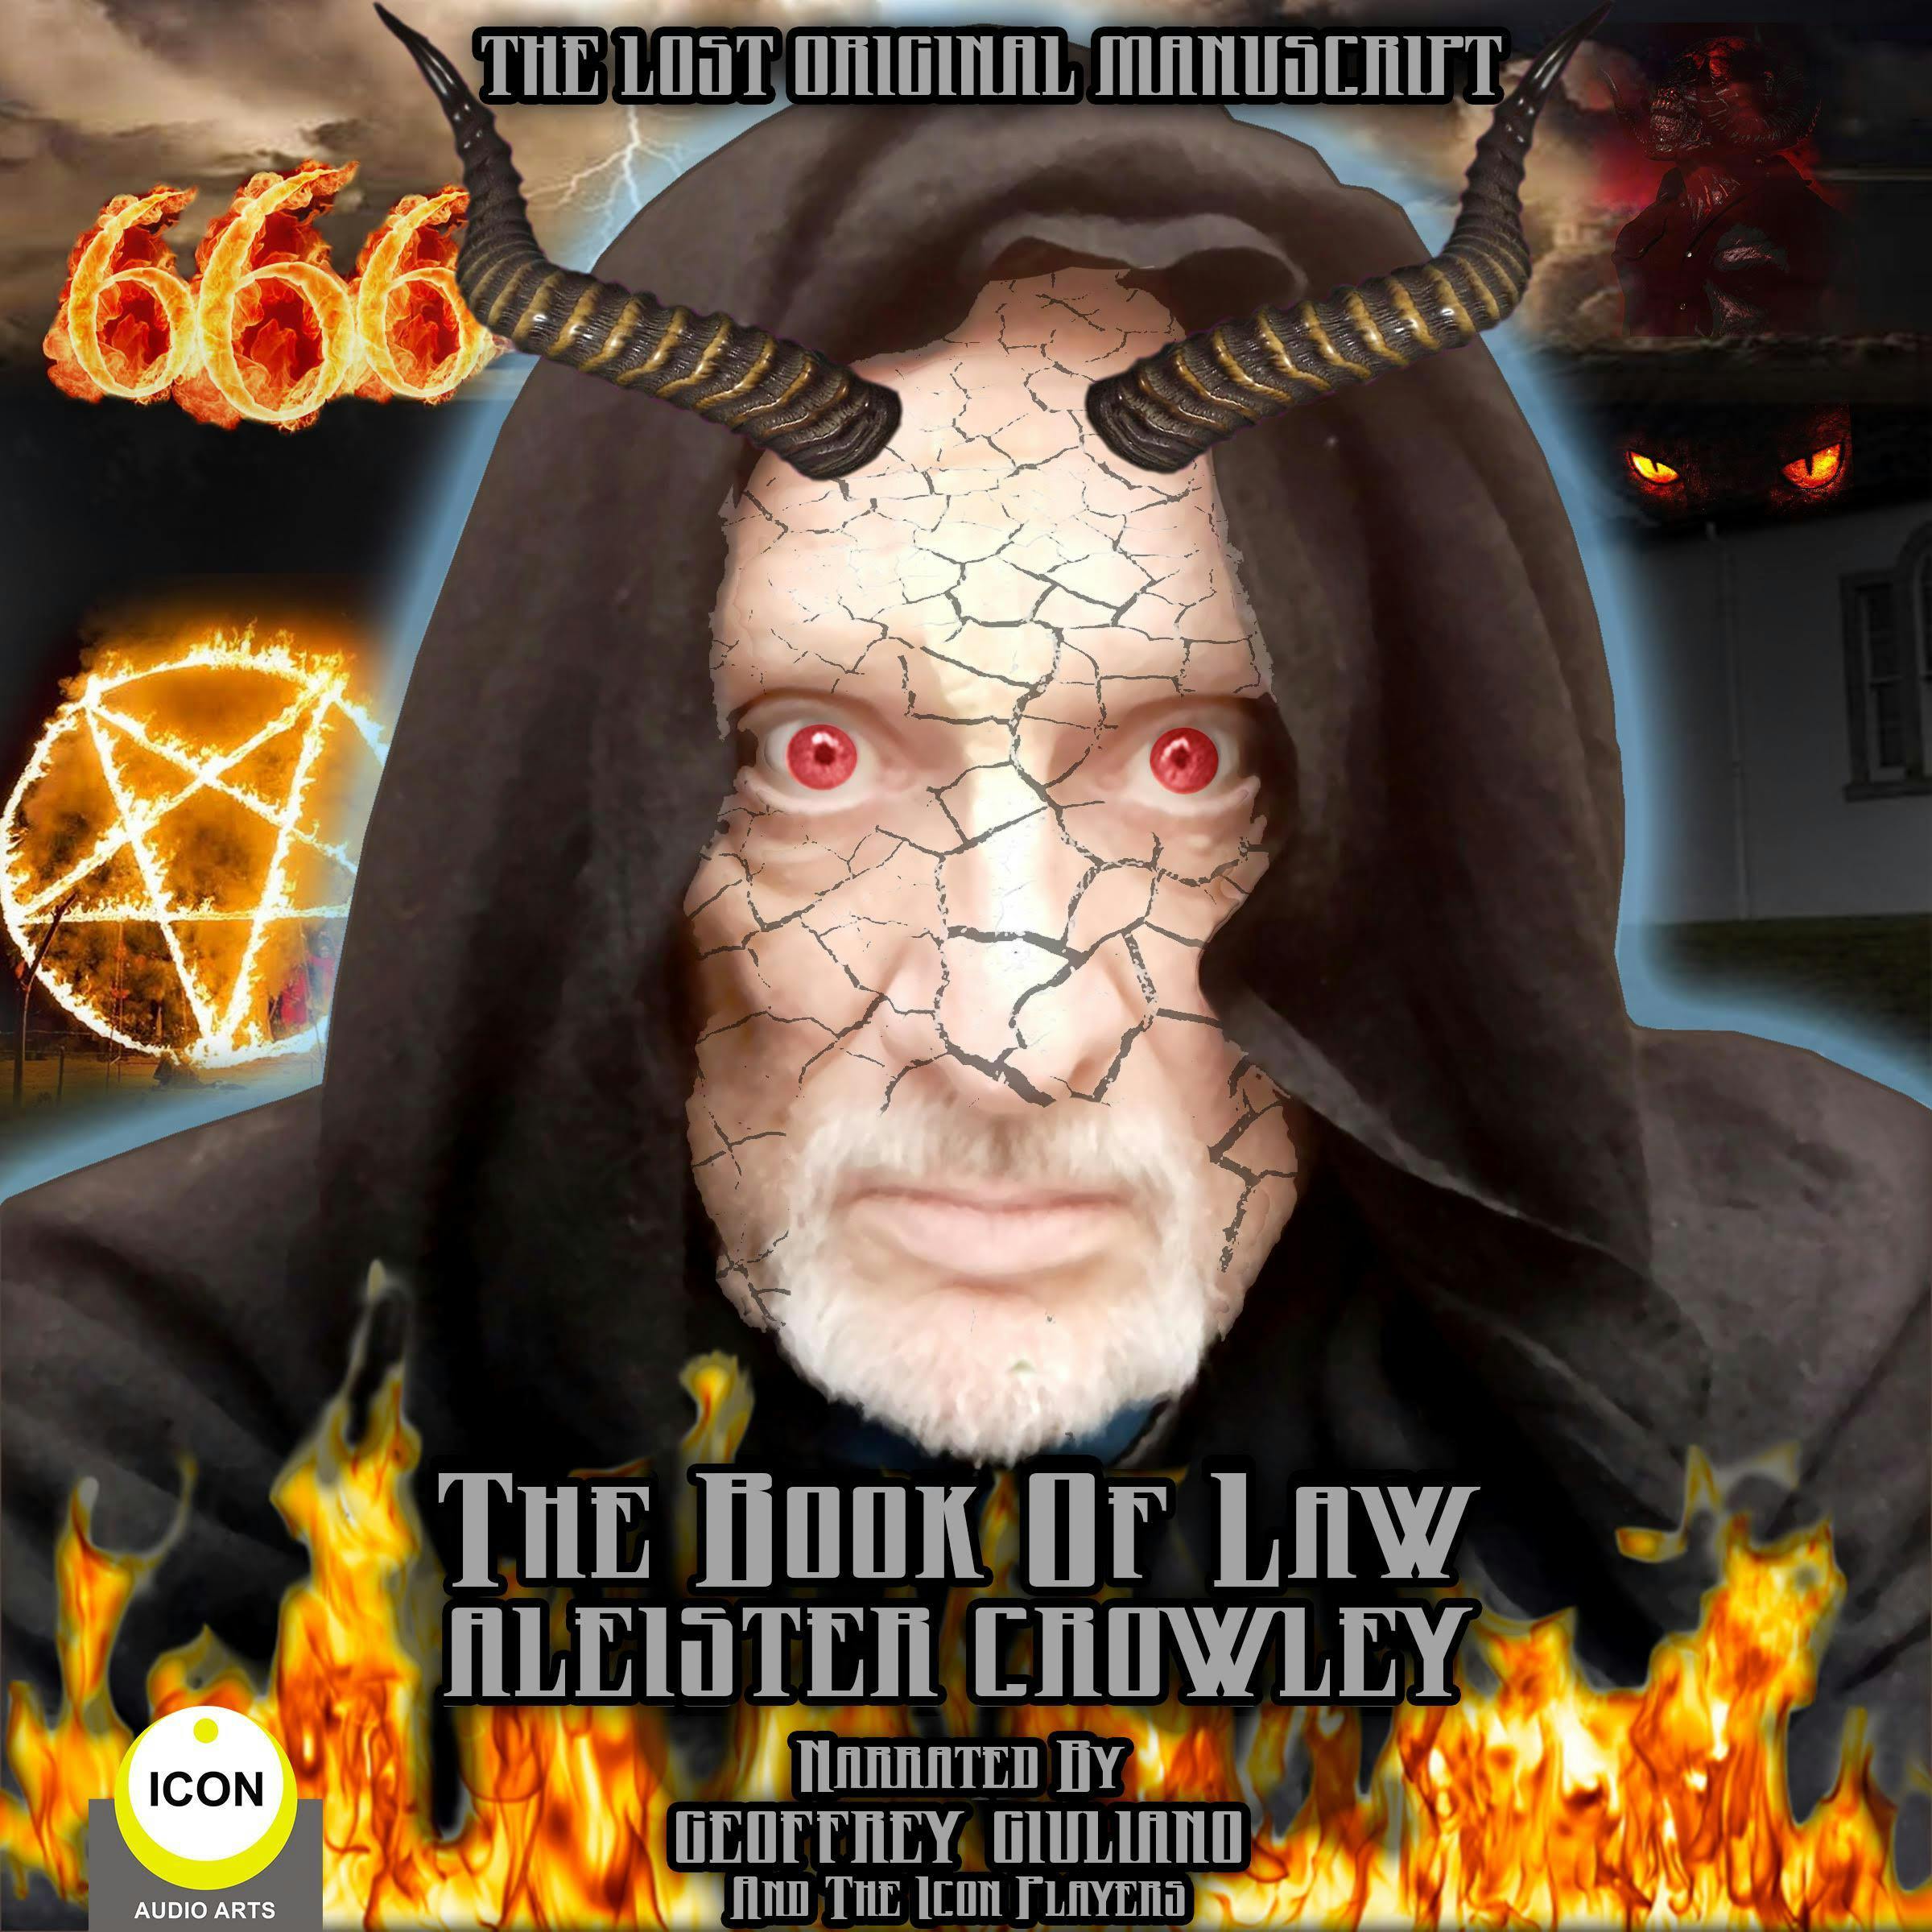 The Book of Law; Aleister Crowley, The Lost Original Manuscript - Aleister Crowley